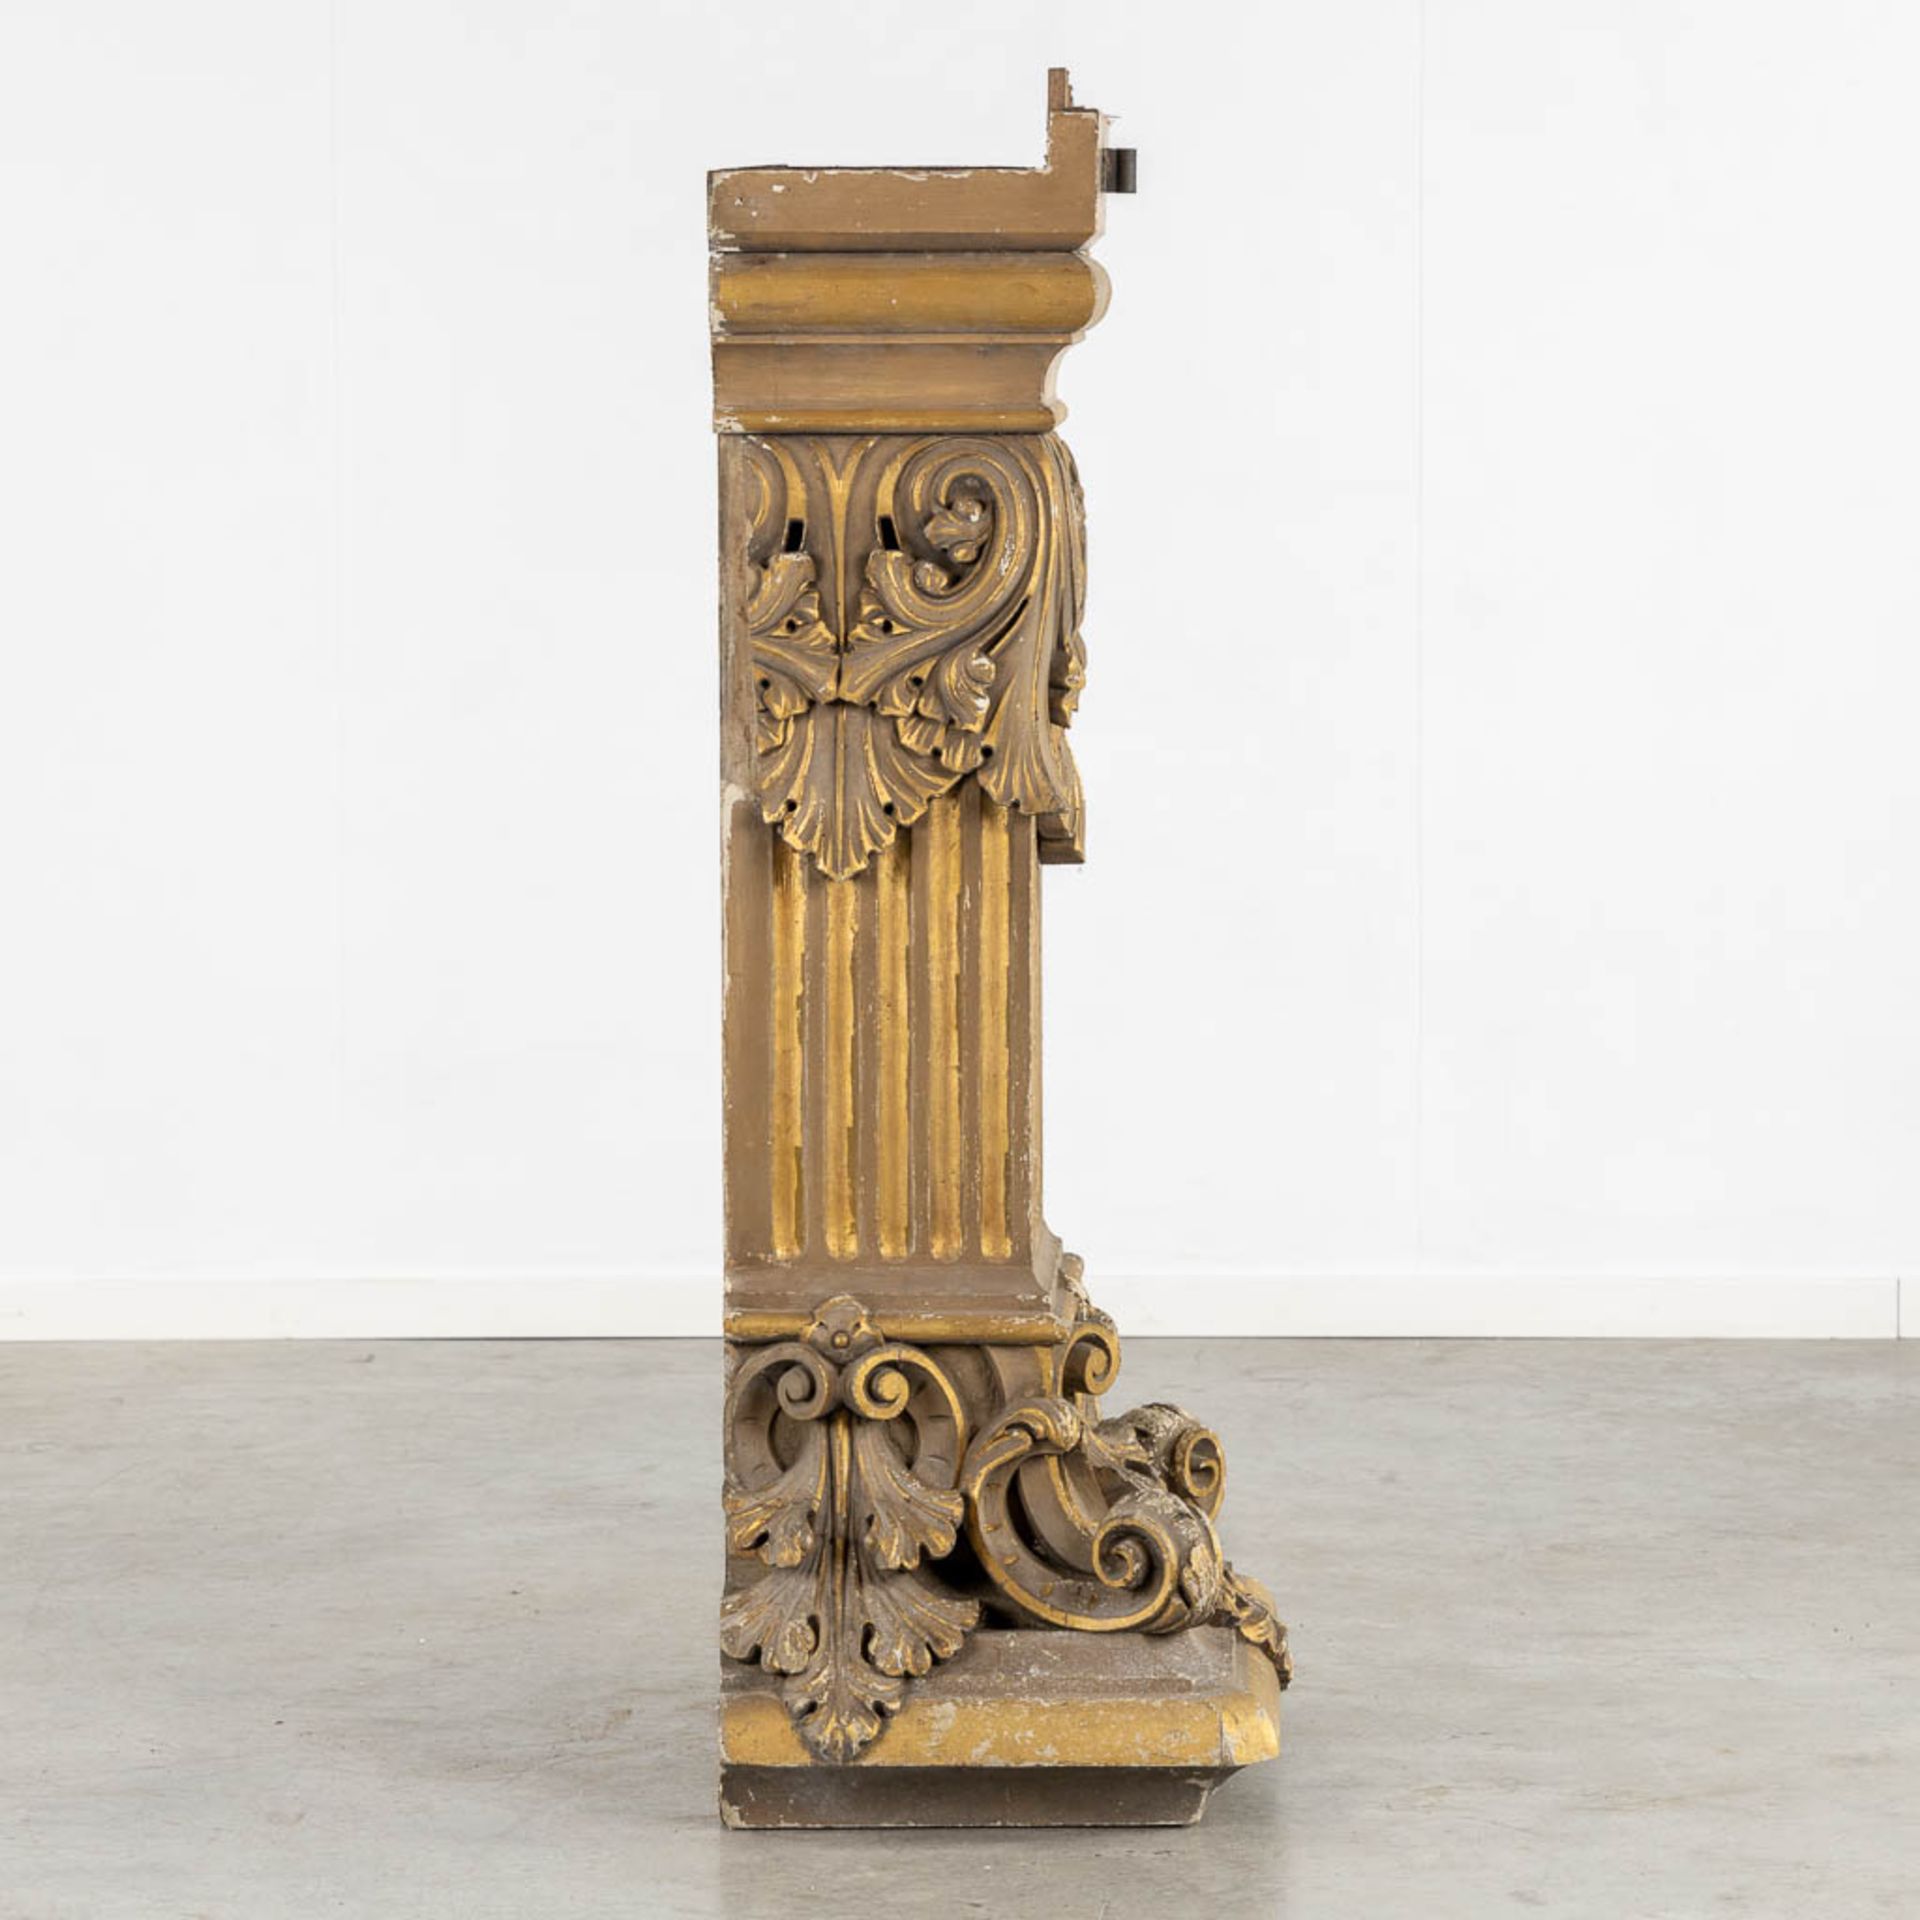 A richly gilt and woodsculptured pedestal with an ionic capitel. Circa 1900. (L:44 x W:60 x H:130 cm - Image 7 of 14